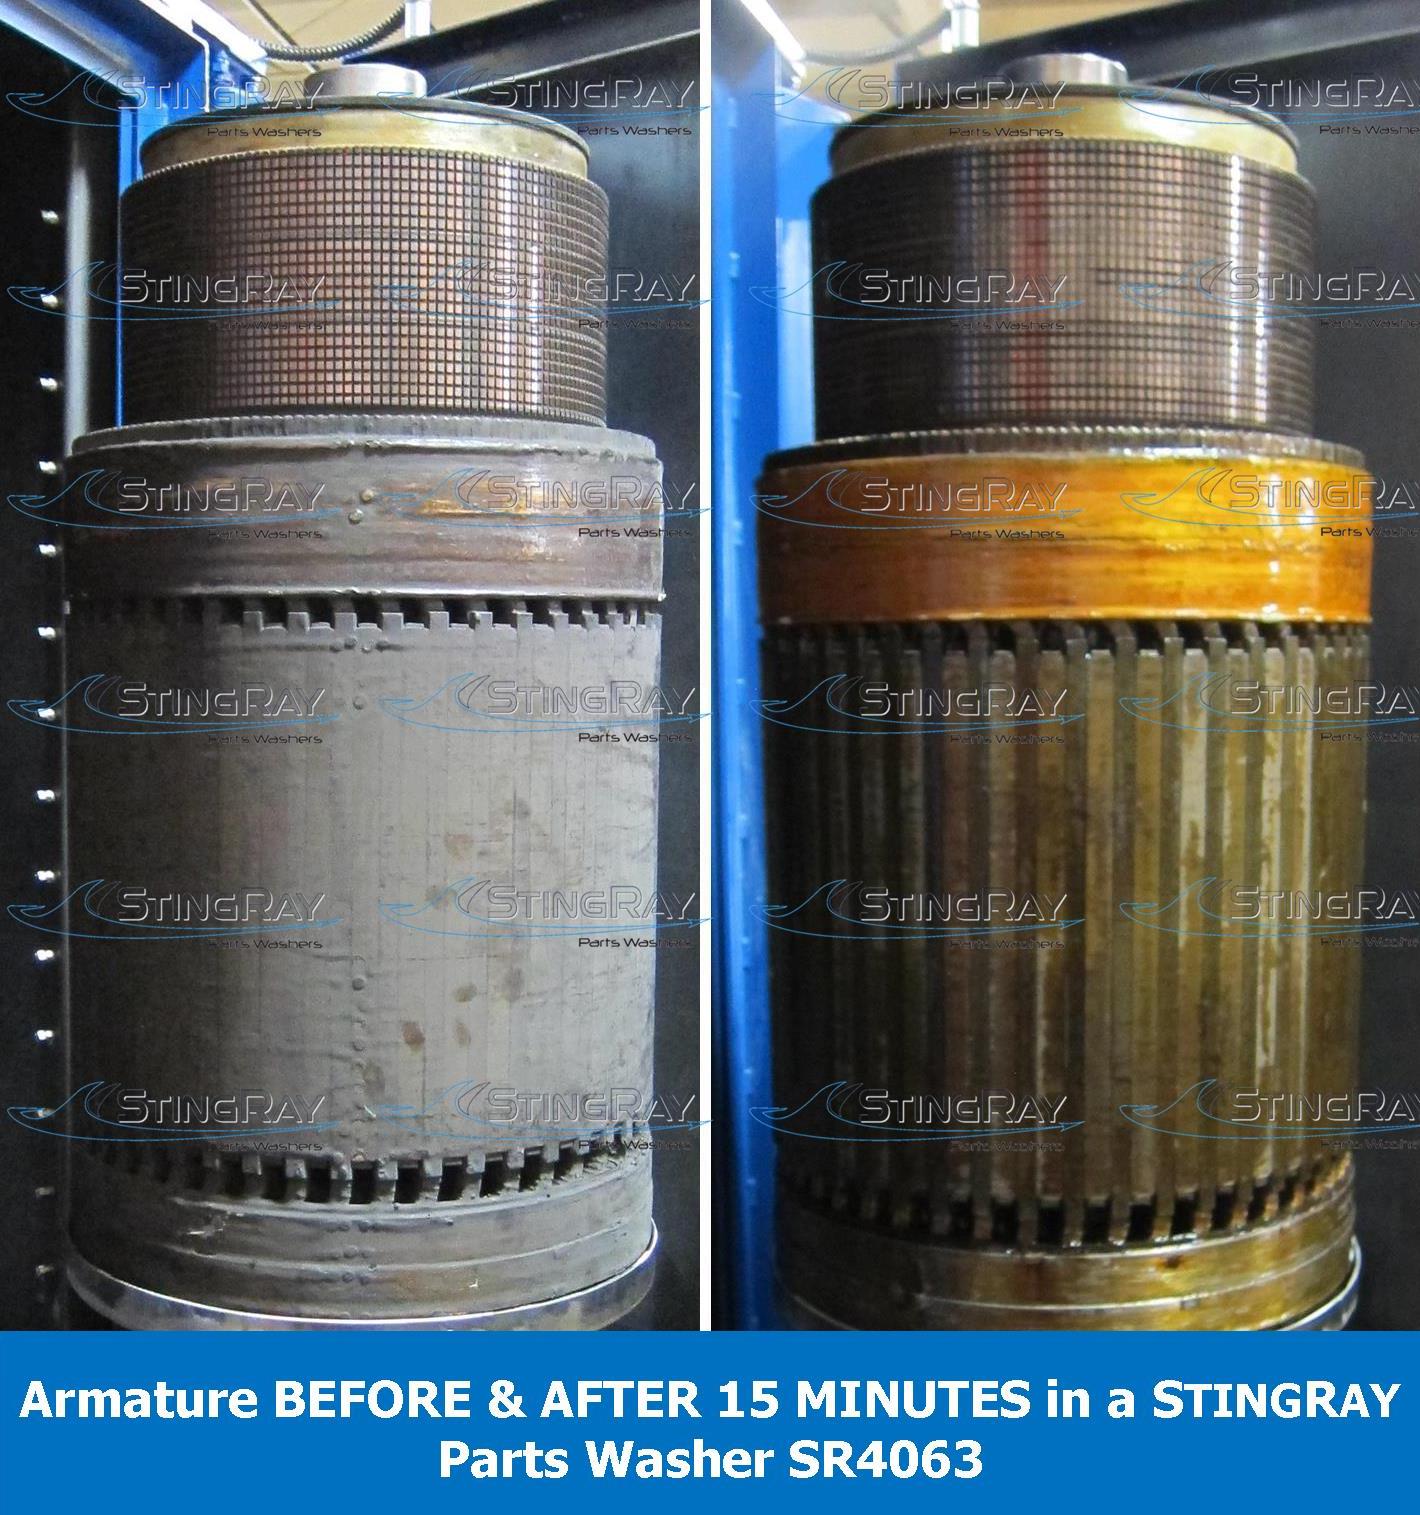 Armature Cleaning Result in StingRay Industrial Parts Washer